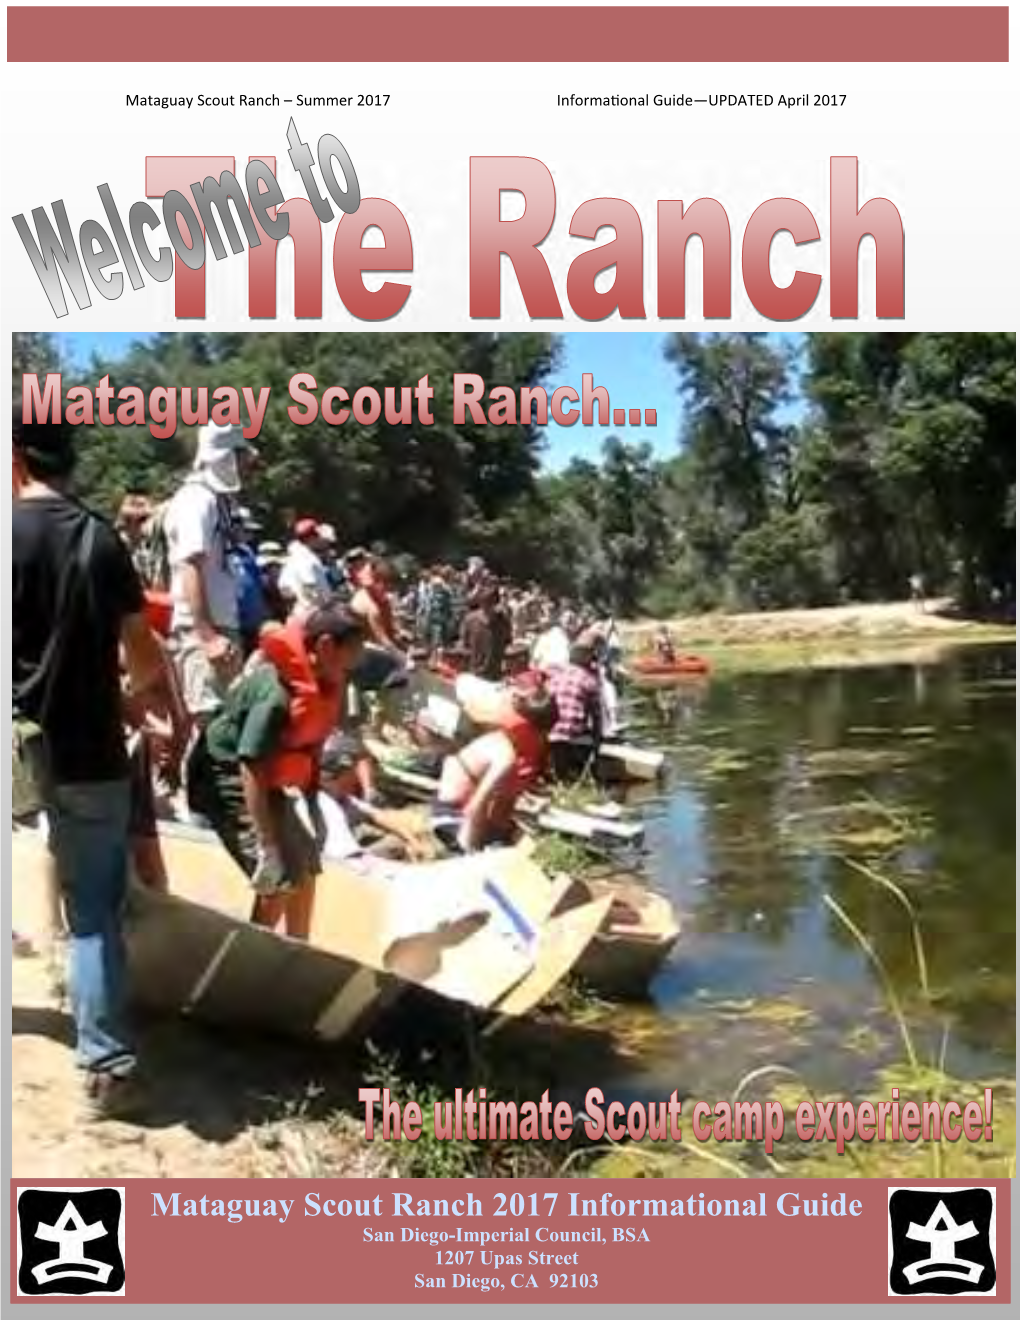 Mataguay Scout Ranch 2017 Informational Guide